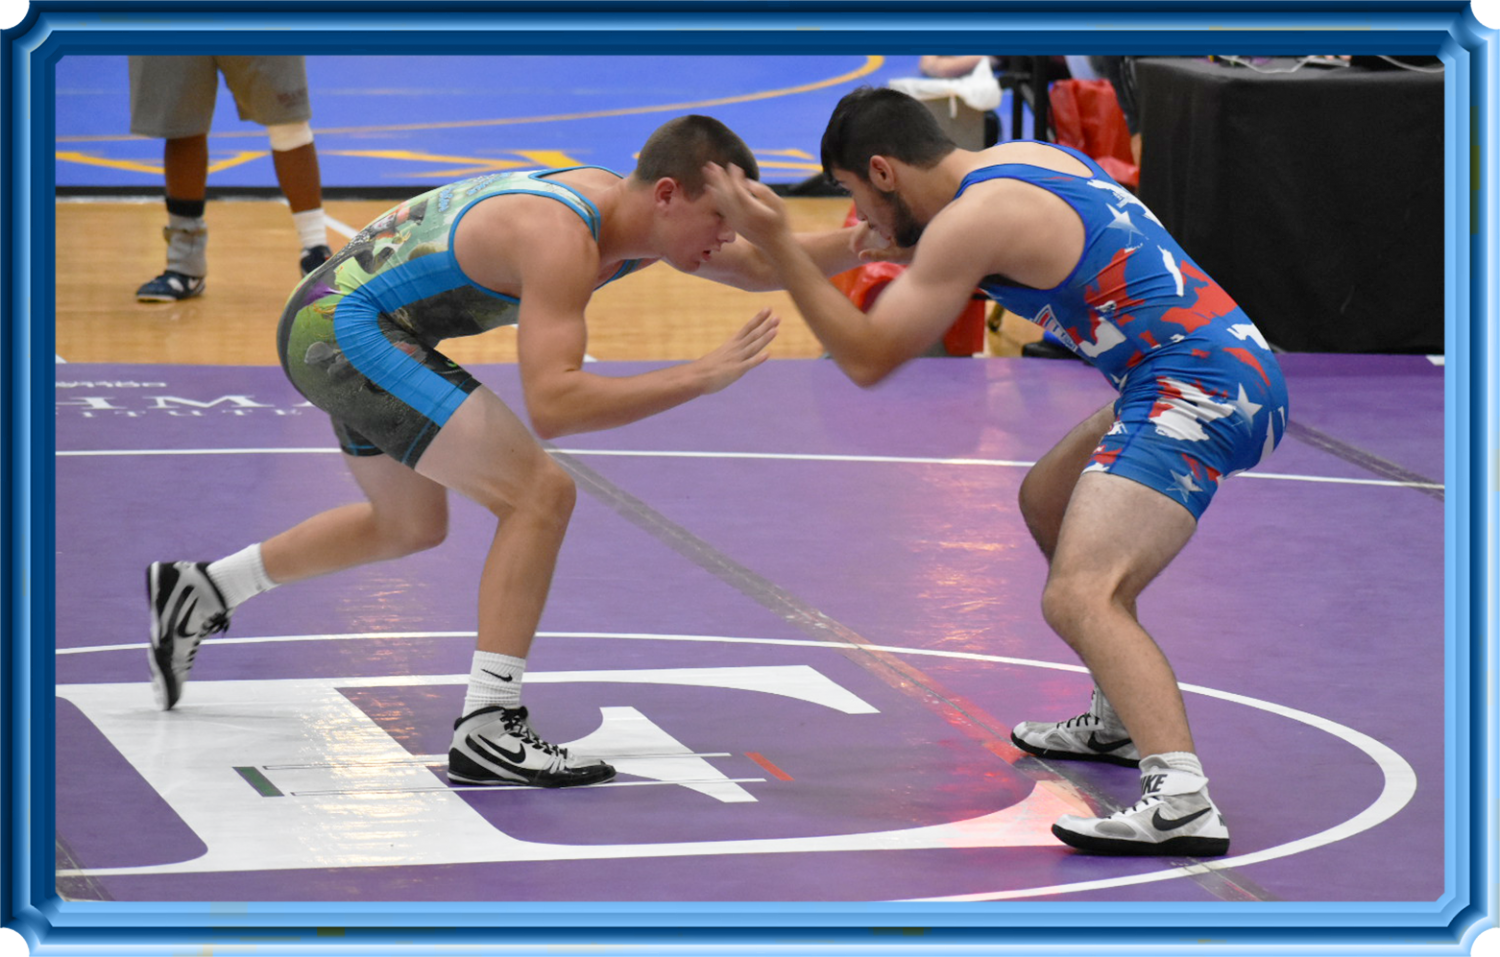 Junior+Brooks+Davis+moves+into+a+wrist+tie+to+control+his+opponent%E2%80%99s+hand.+He+won+the+match.+The+Perry+wrestlers+wore+Alice-in-Wonderland+singlets+%28a+one-piece+wrestling+uniform%29+to+represent+the+Falcons+at+the+special+event.+The+specialty-designed+singlet+featured+a+picture+of+Alice+on+the+front+and+the+Mad+Hatter+on+the+back.+%28Photo+provided+by+Luis+Zepeda+Sr.%29+%0A